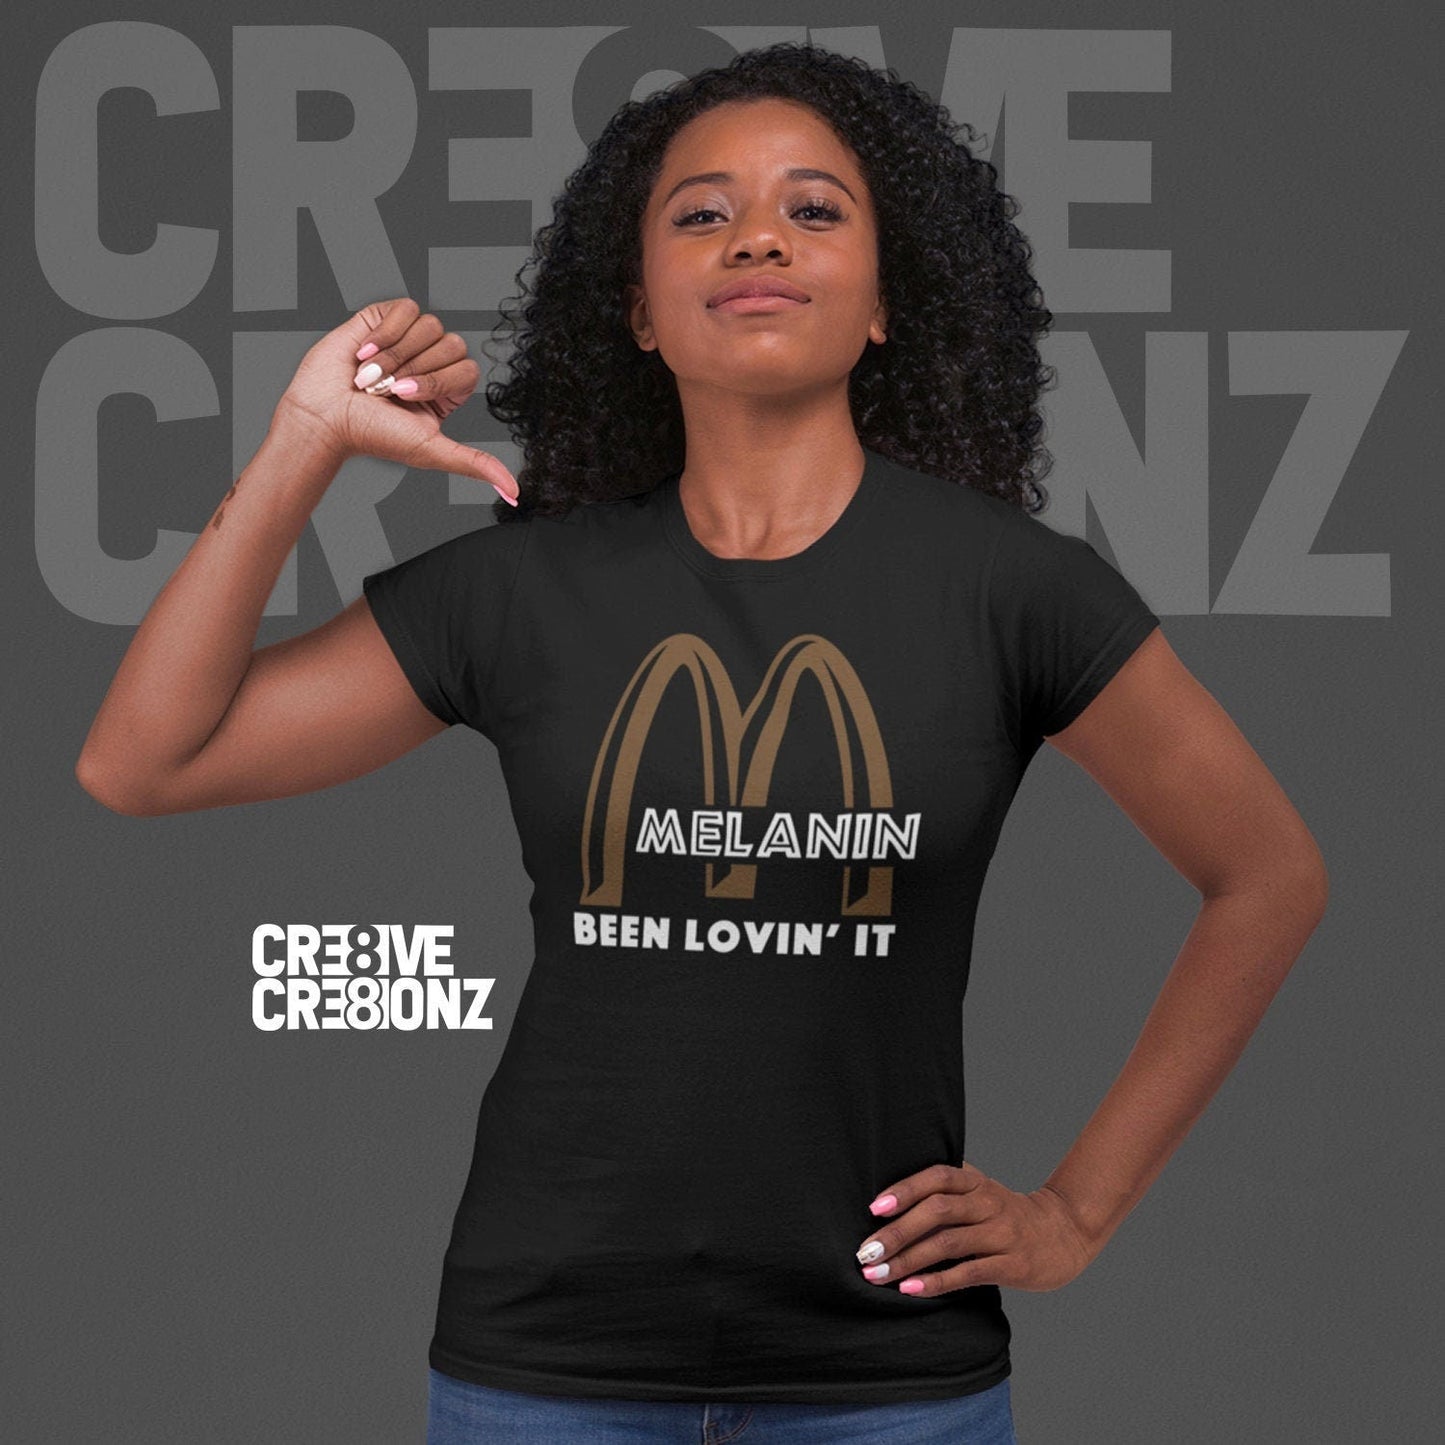 Melanin Been Lovin' It T-shirt - Cre8ive Cre8ionz